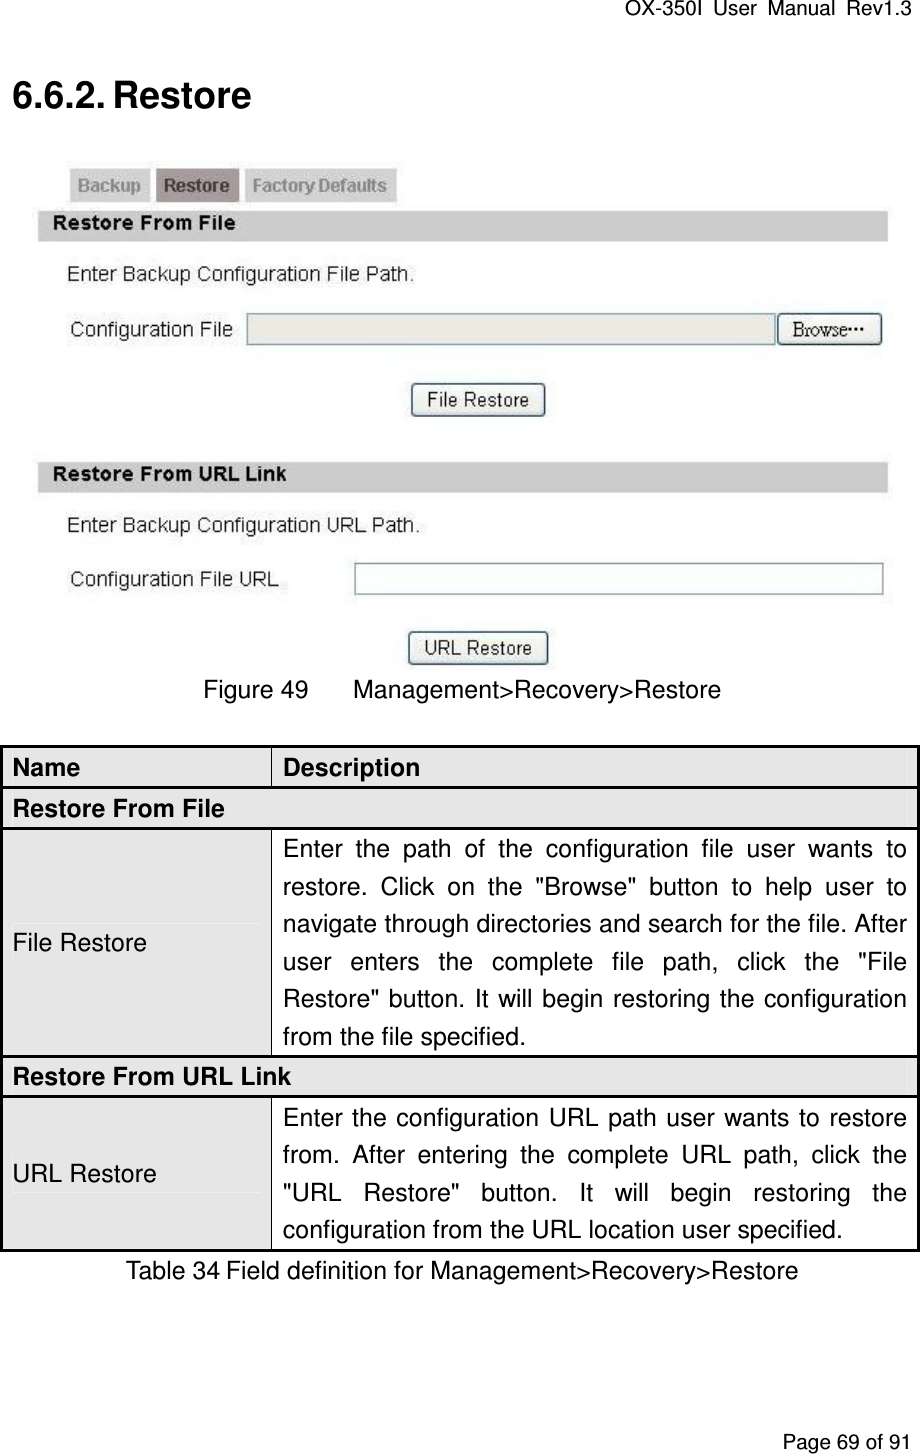 OX-350I  User  Manual  Rev1.3 Page 69 of 91 6.6.2. Restore    Figure 49  Management&gt;Recovery&gt;Restore Name  Description Restore From File File Restore Enter  the  path  of  the  configuration  file  user  wants  to restore.  Click  on  the  &quot;Browse&quot;  button  to  help  user  to navigate through directories and search for the file. After user  enters  the  complete  file  path,  click  the  &quot;File Restore&quot; button. It will begin restoring the configuration from the file specified.   Restore From URL Link URL Restore Enter the configuration URL path user wants to restore from.  After  entering  the  complete  URL  path,  click  the &quot;URL  Restore&quot;  button.  It  will  begin  restoring  the configuration from the URL location user specified. Table 34 Field definition for Management&gt;Recovery&gt;Restore 